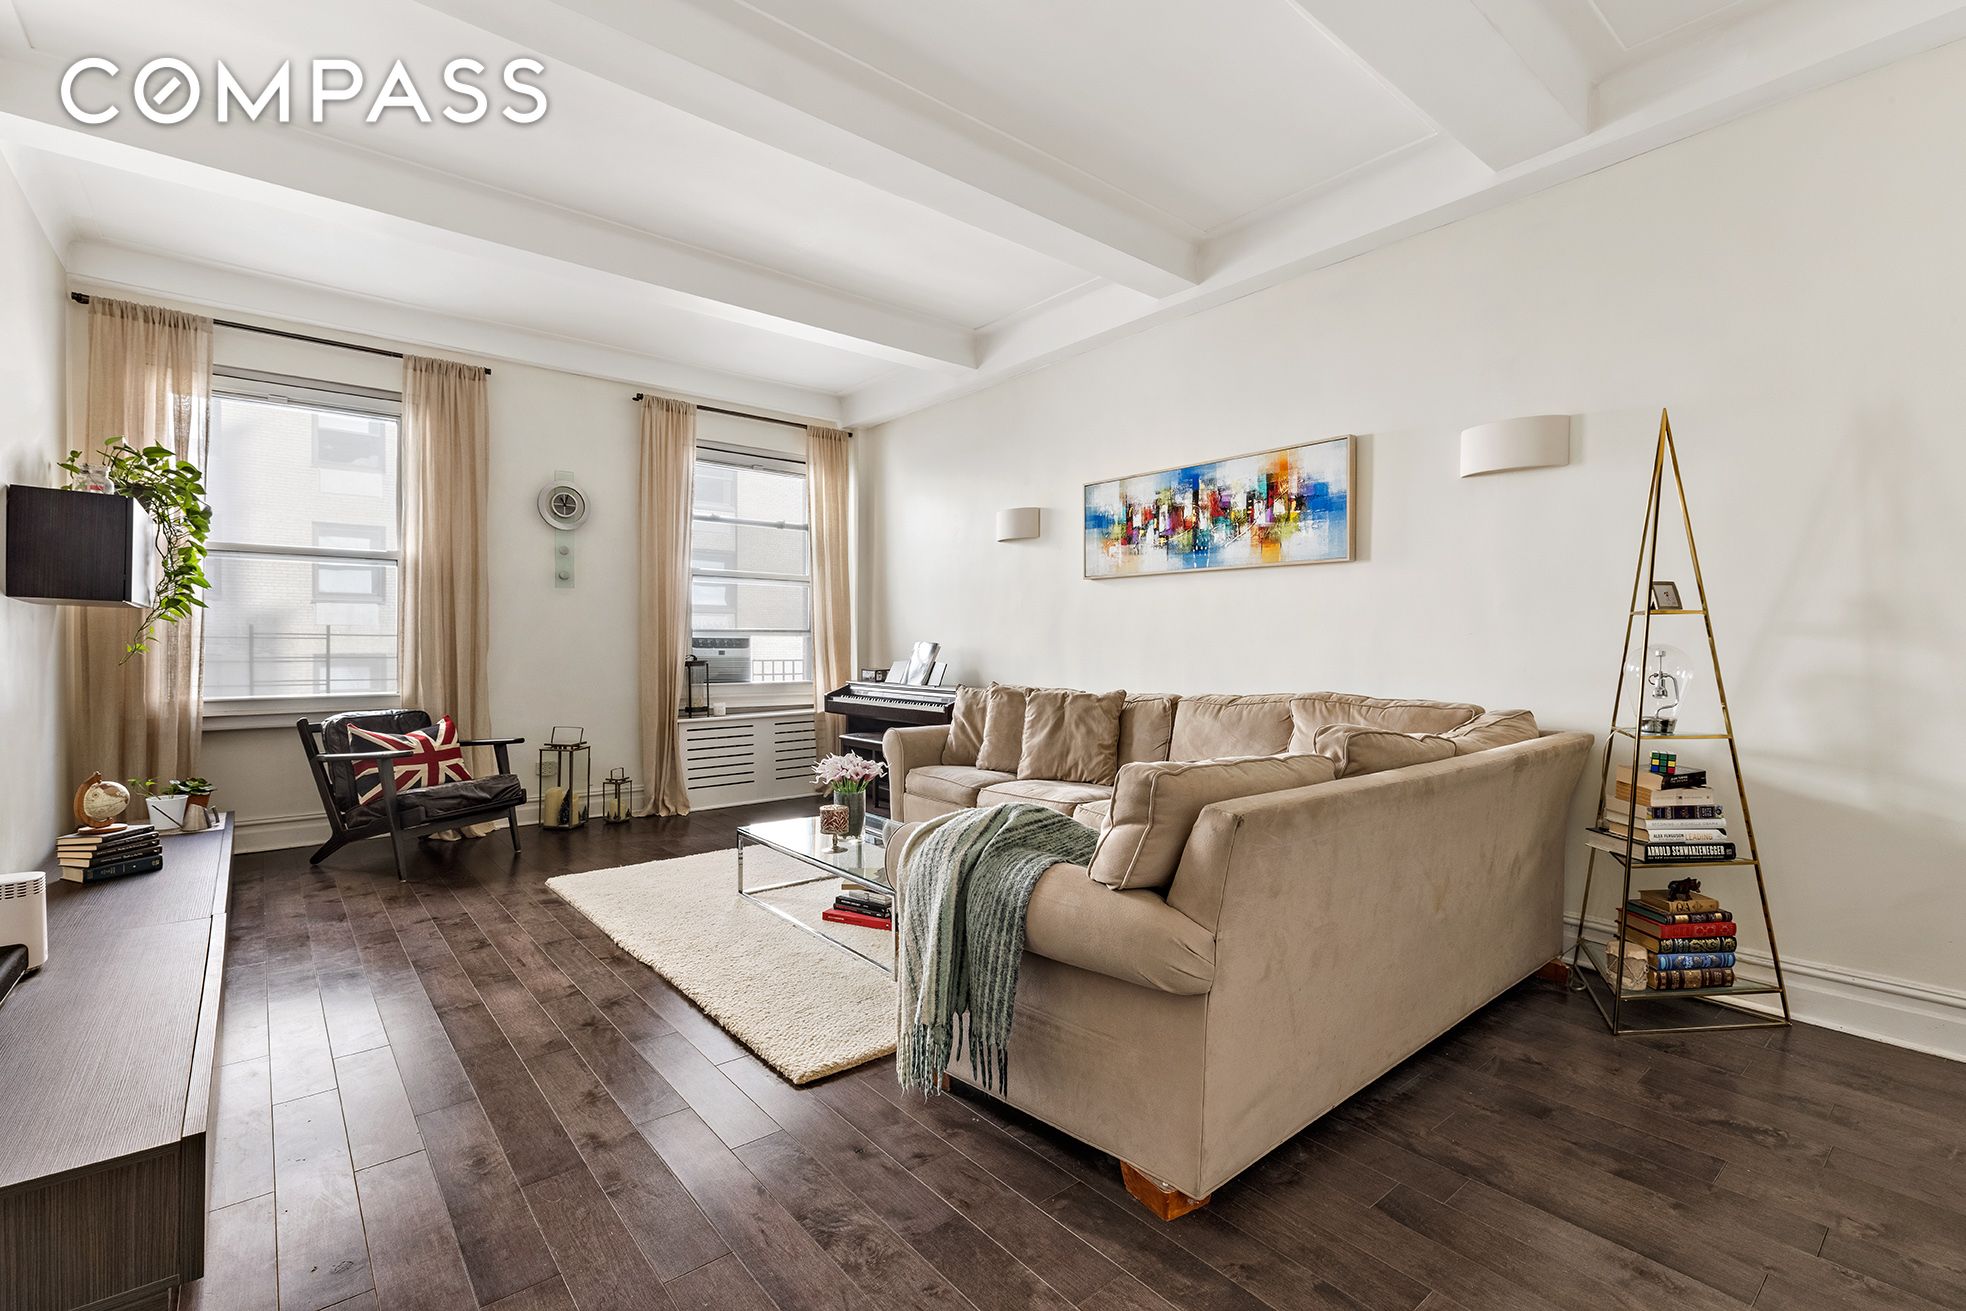 152 West 58th Street 8A, Midtown Central, Midtown East, NYC - 2 Bedrooms  
1.5 Bathrooms  
3 Rooms - 